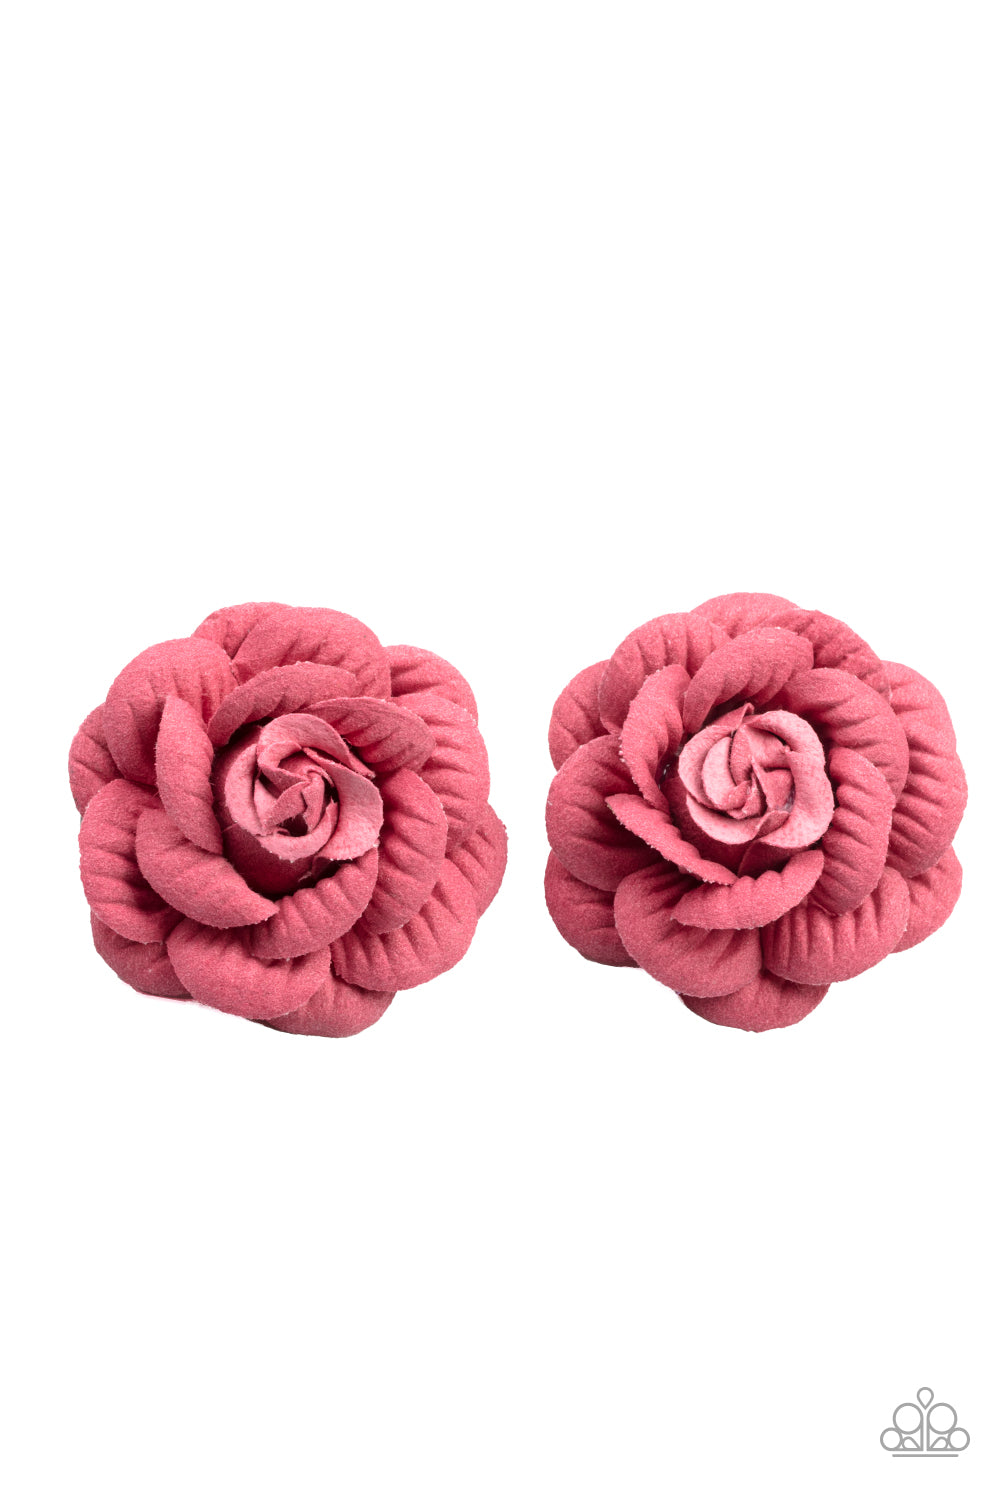 Best of Buds - Pink Hair Bows - Princess Glam Shop